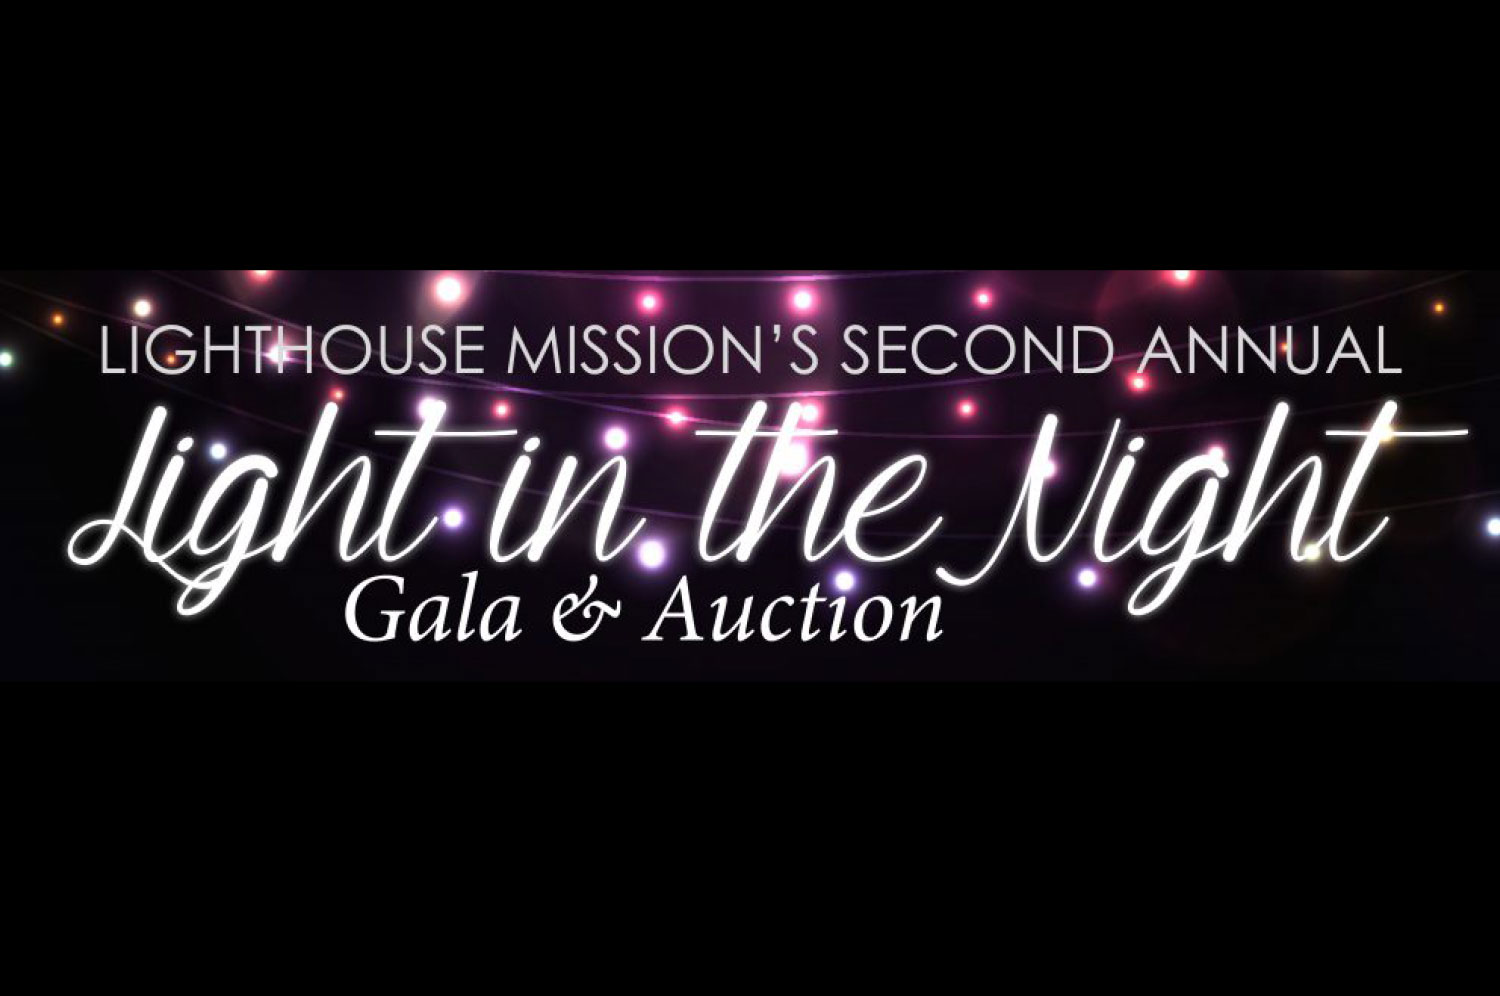 The Lightouse Mission Ministries Light the Night Gala